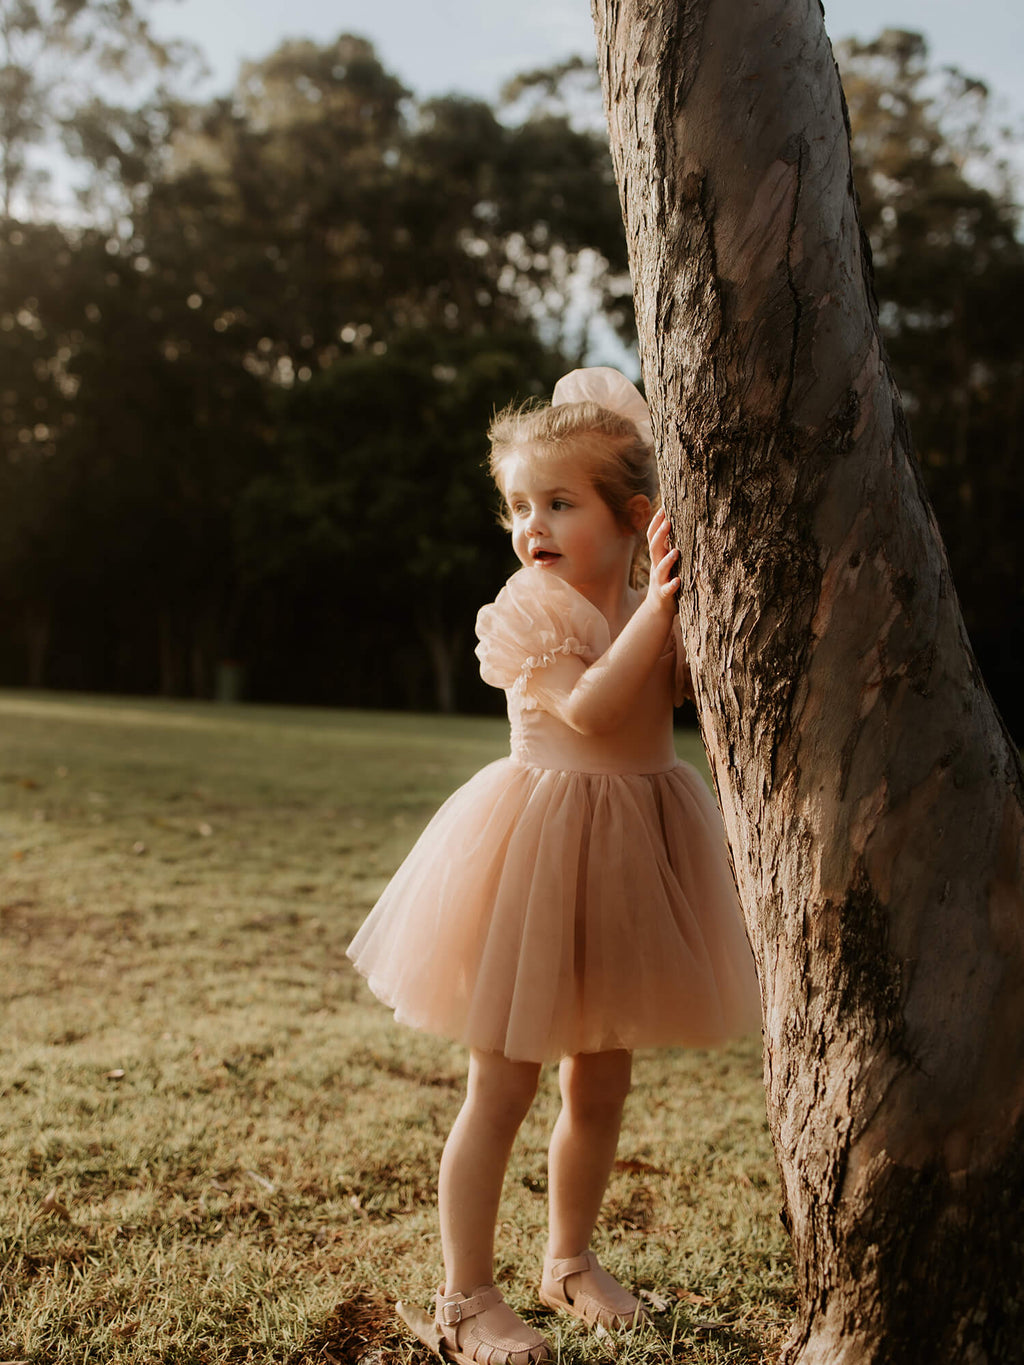 Layla champagne flower girl dress with puff sleeves is worn by a young girl, she also wears a matching tulle bow in her hair.